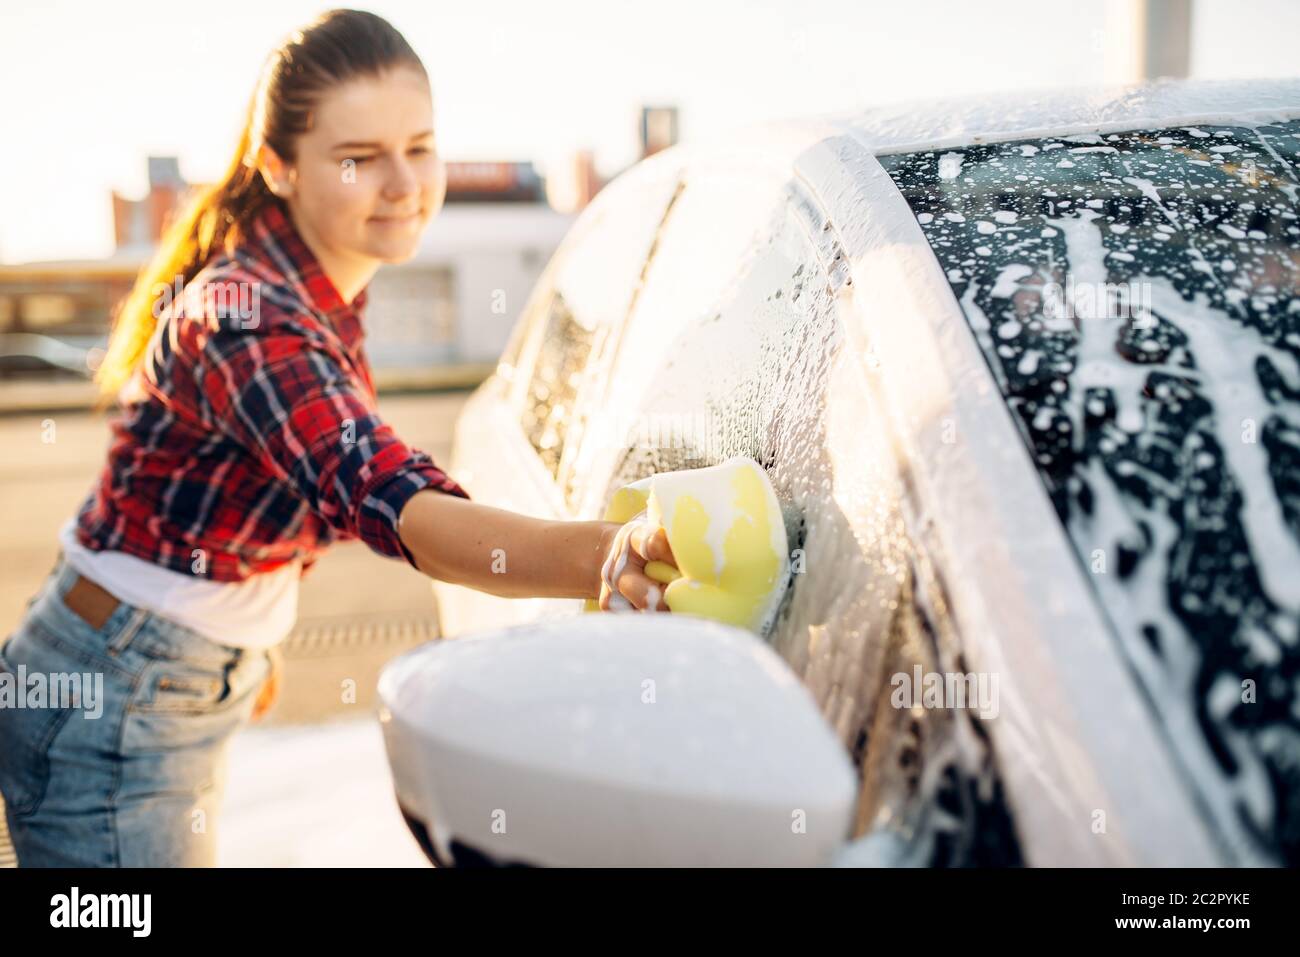 Female person hand with sponge scrubbing vehicle with foam, car